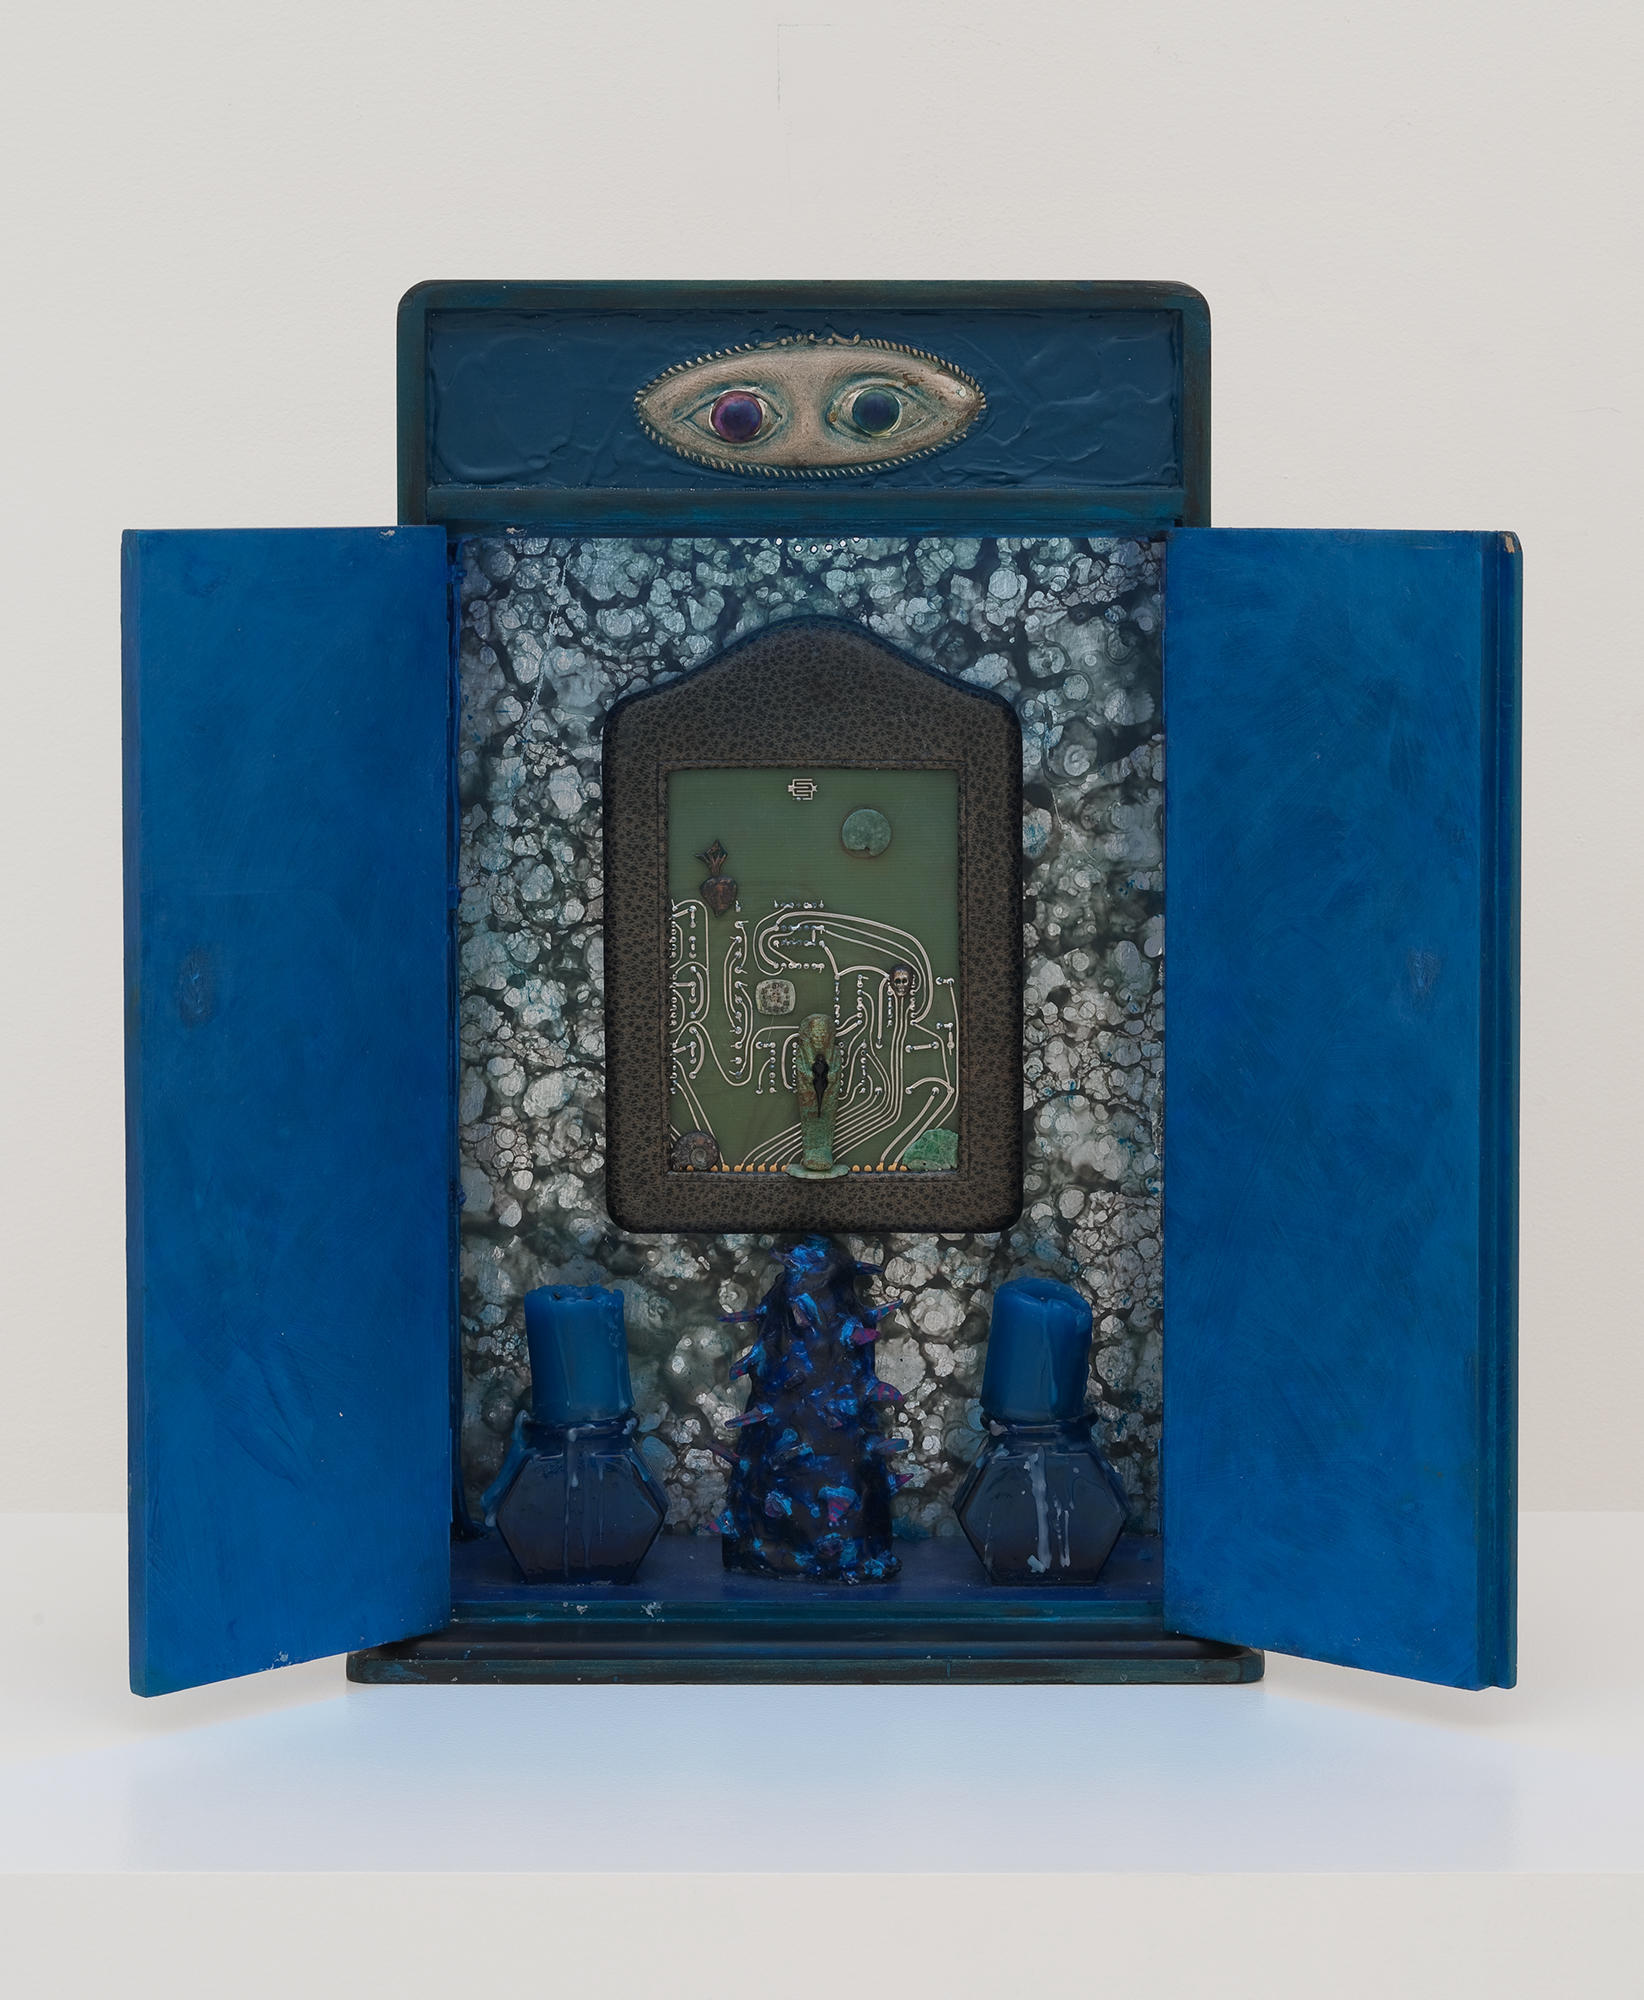 Betye Saar’s Indigo Illusions. An assembled altar-like sculpture in tones of blue has a luggage tag with a drawing above two burned down blue candles. Two open eyes are on the top of the work.